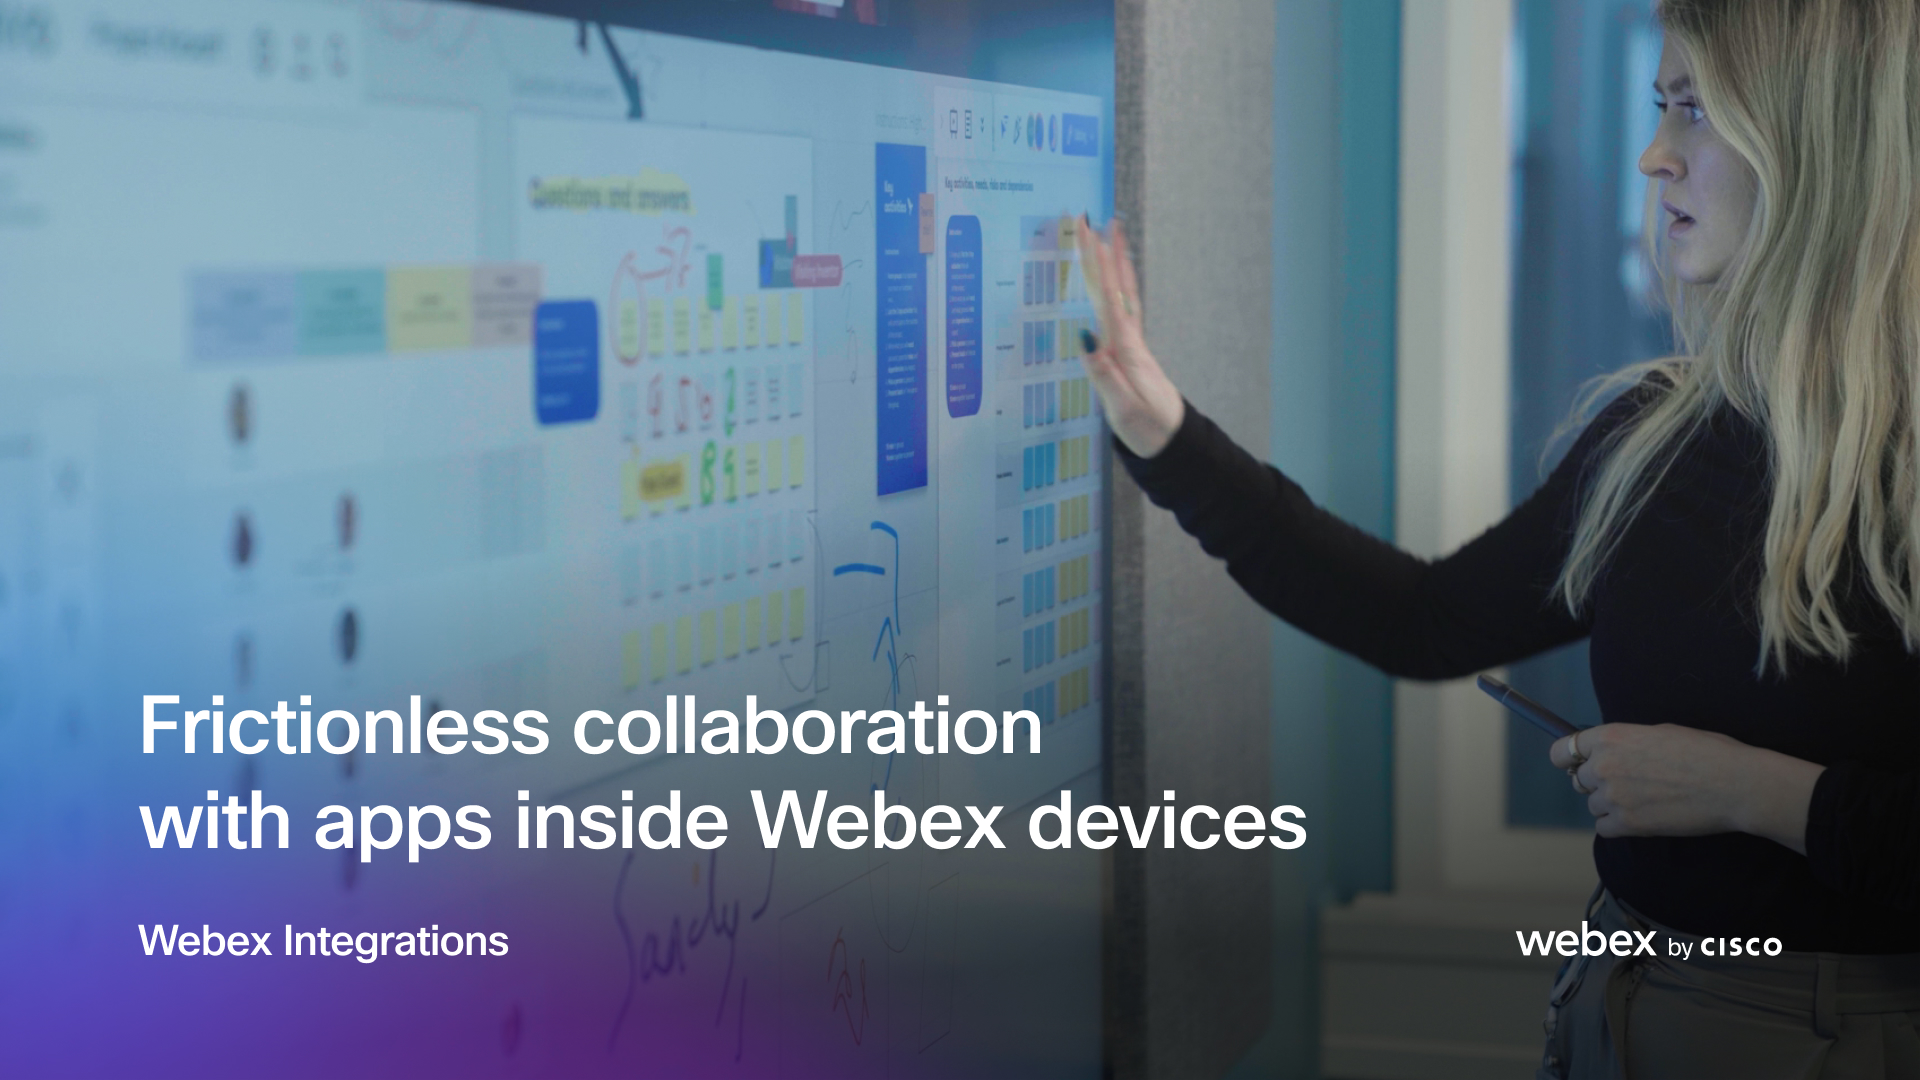 Video: Frictionless Collaboration with Apps Inside Webex Devices